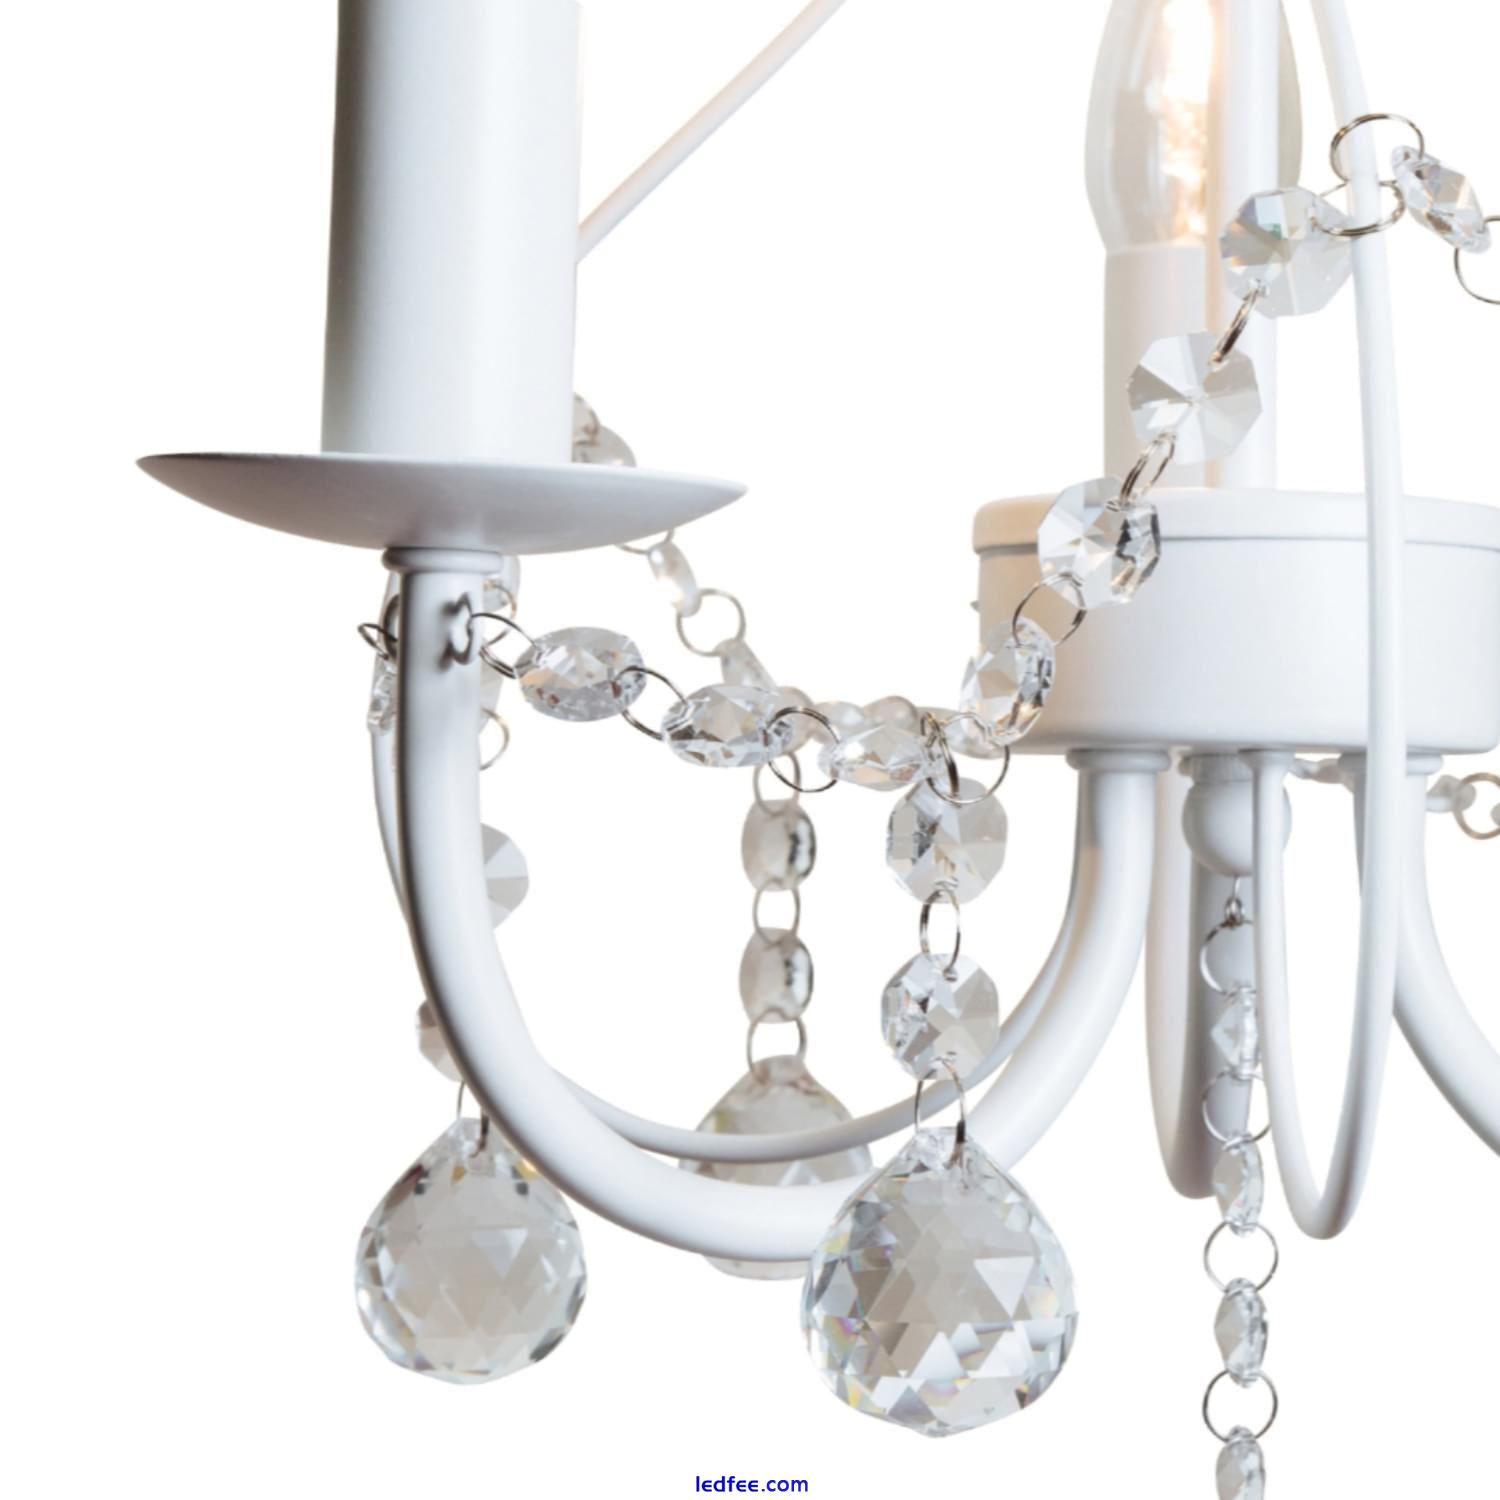 Luxury White & Crystal 3 Light Ceiling Fitting Chandelier Light Lounge Sapparia 2 